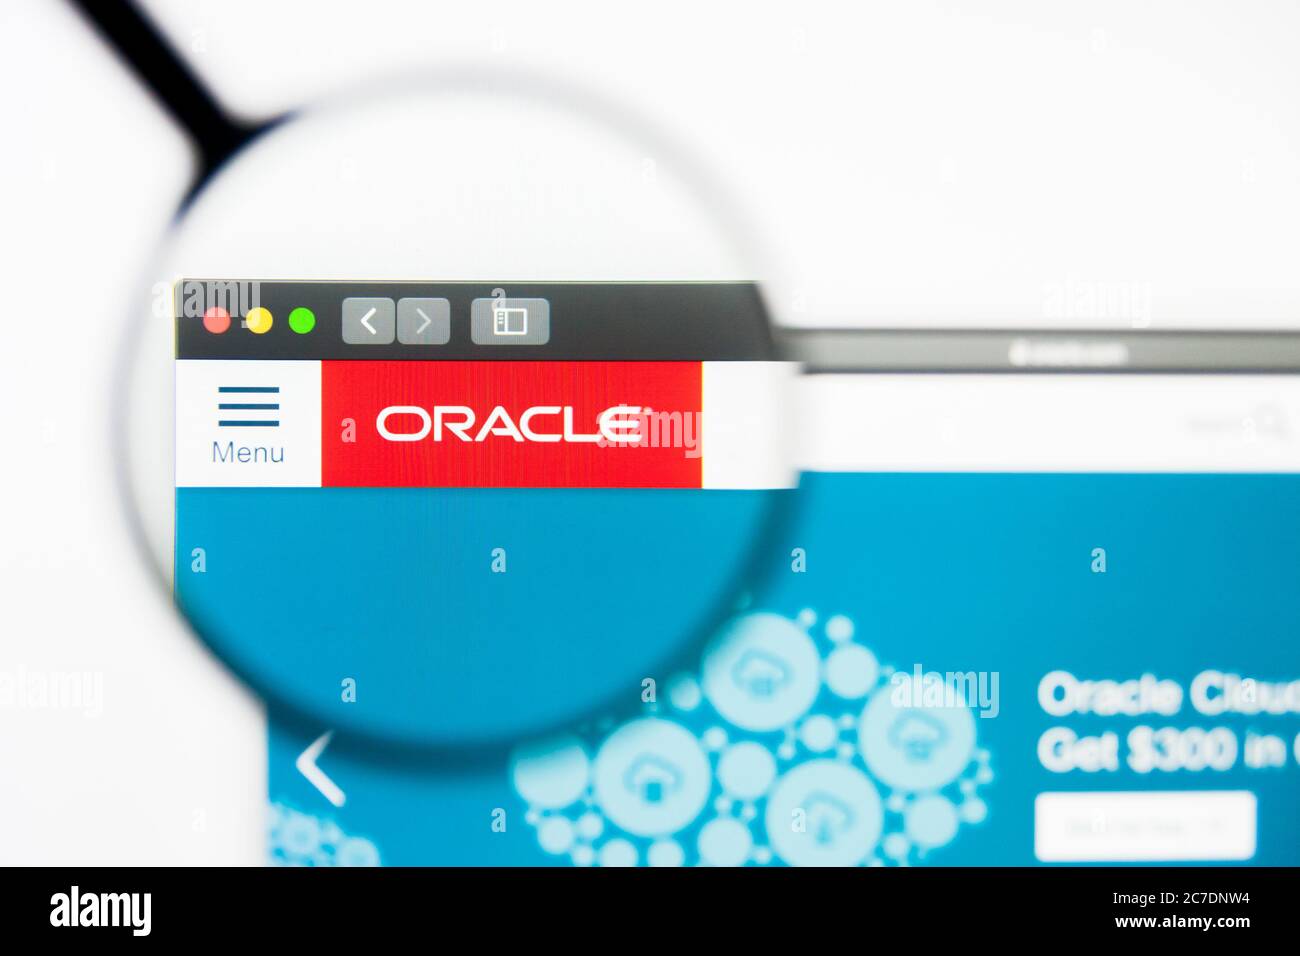 Los Angeles, California, USA - 8 April 2019: Illustrative Editorial of Oracle website homepage. Oracle logo visible on display screen. Stock Photo